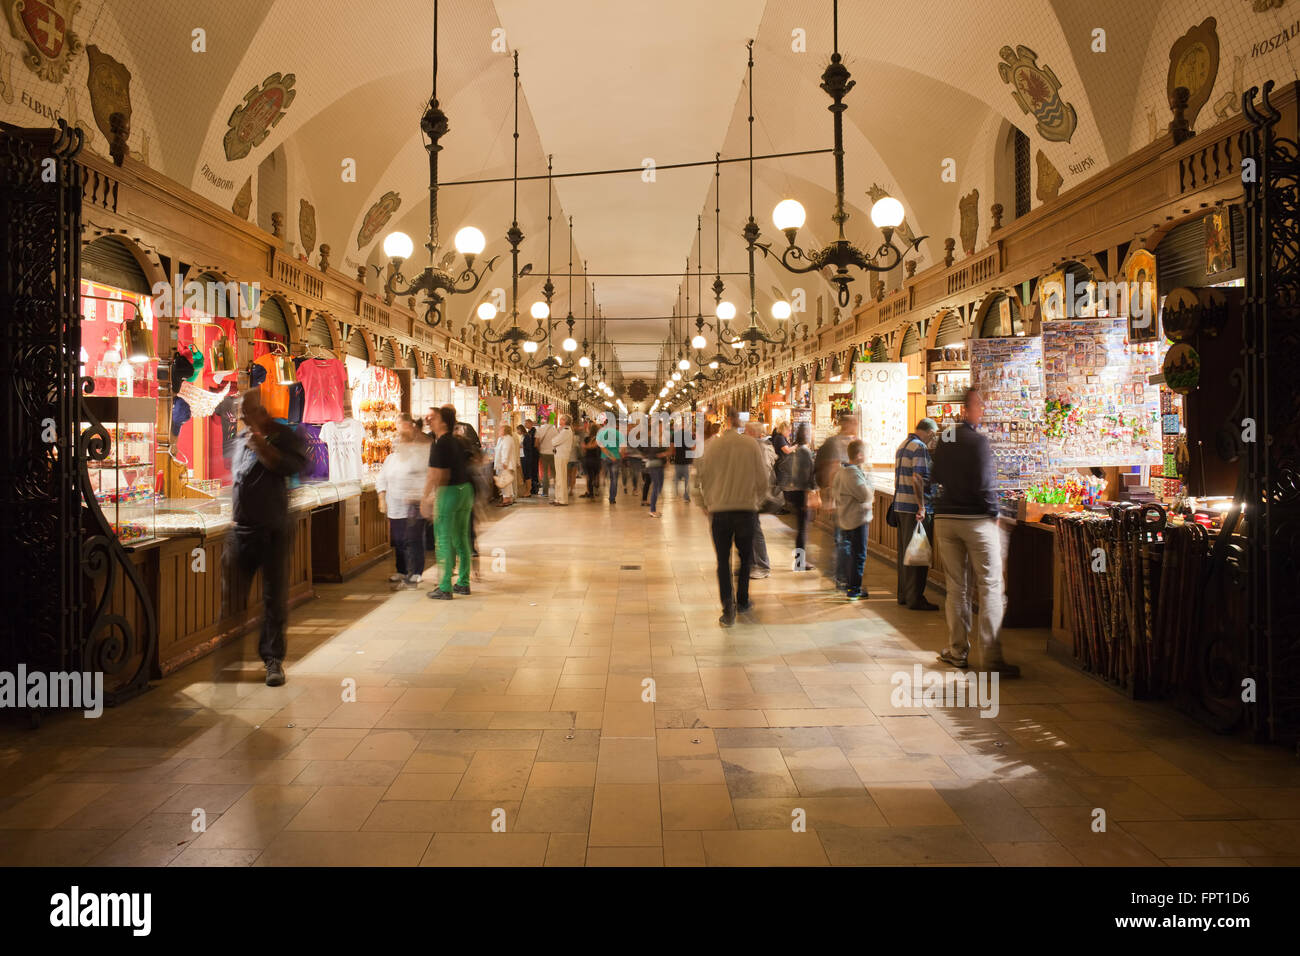 Poland, city of Krakow (Cracow) at night, Sukiennice - Cloth Hall interior with people, tourists Stock Photo